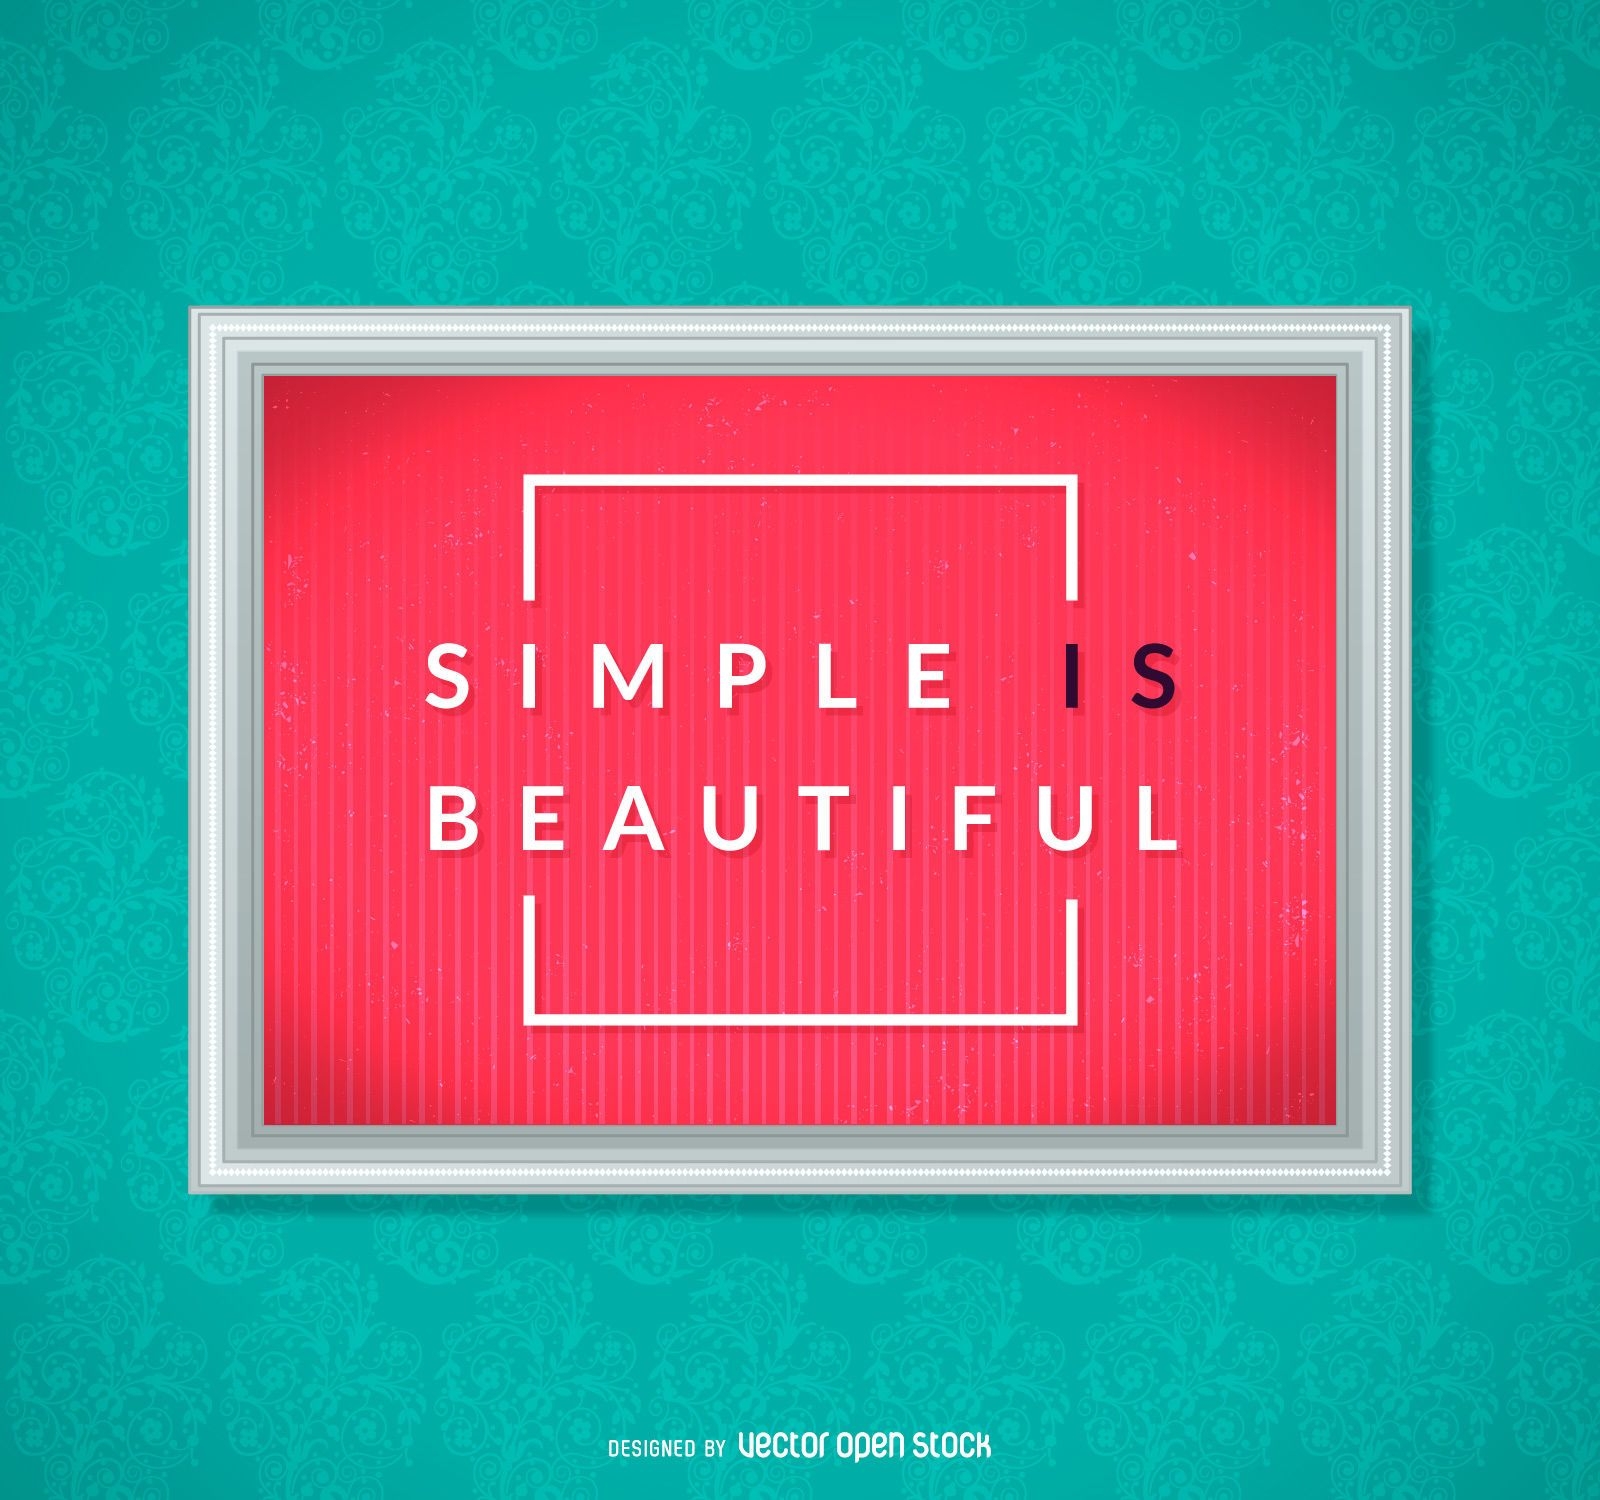 Simple is beautiful quote